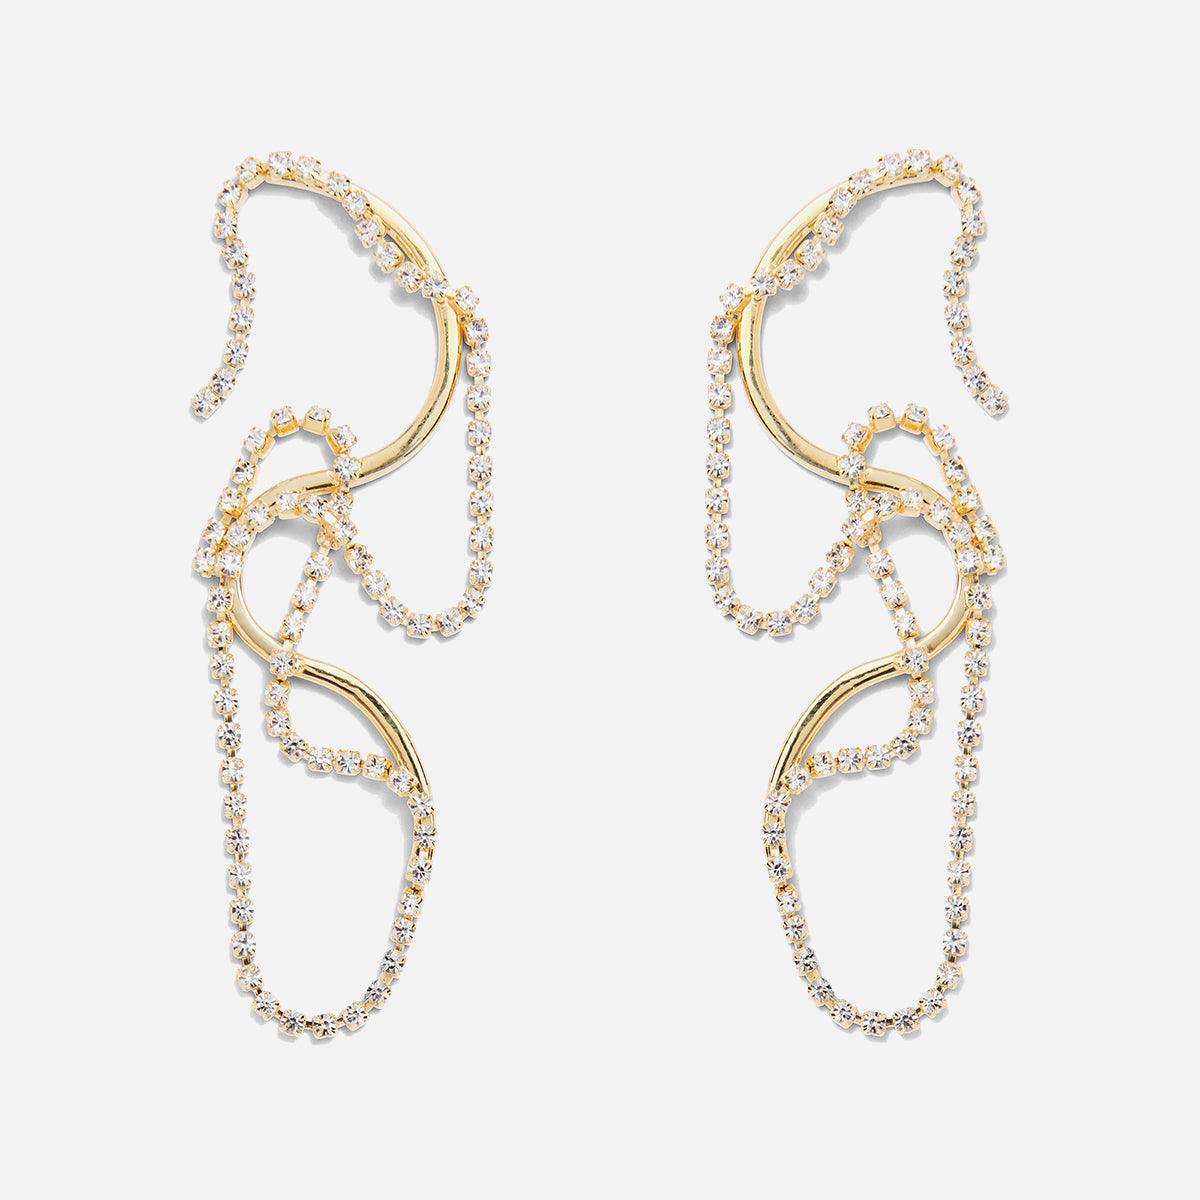 Scribble Earrings in Gold - At Present